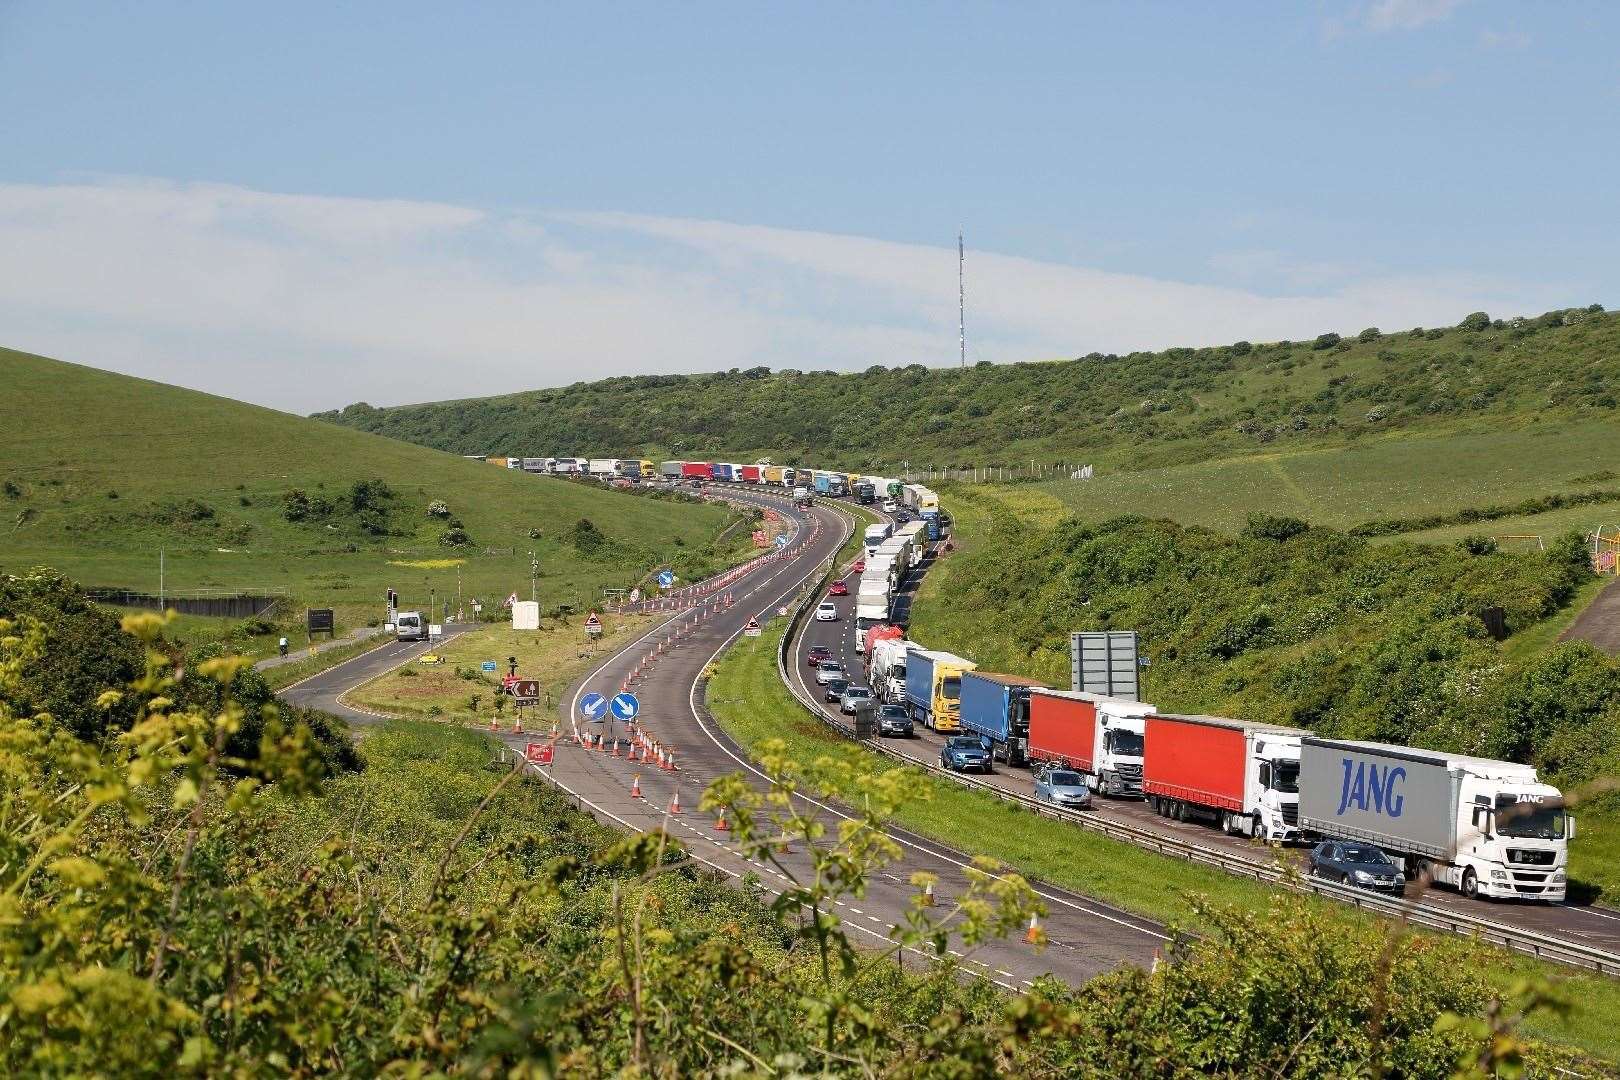 WARNING SMALL FILE SIZE..KMG GROUP USE ONLY..Conditions of Use: ..Slug: HORNS DO 020617..Caption: Lorries queued up on the A20 near Aycliffe, Dover, during Dover TAP...Location: Dover..Category: Environment Issues..Byline: Roger Golding (please credit)..Contact Name: Roger Golding..Contact Email: golding@tiscali.co.uk..Contact Phone: not supplied..Uploaded By: Sam LENNON..Copyright: Roger Golding..Original Caption:.... FM4796226. (43639815)